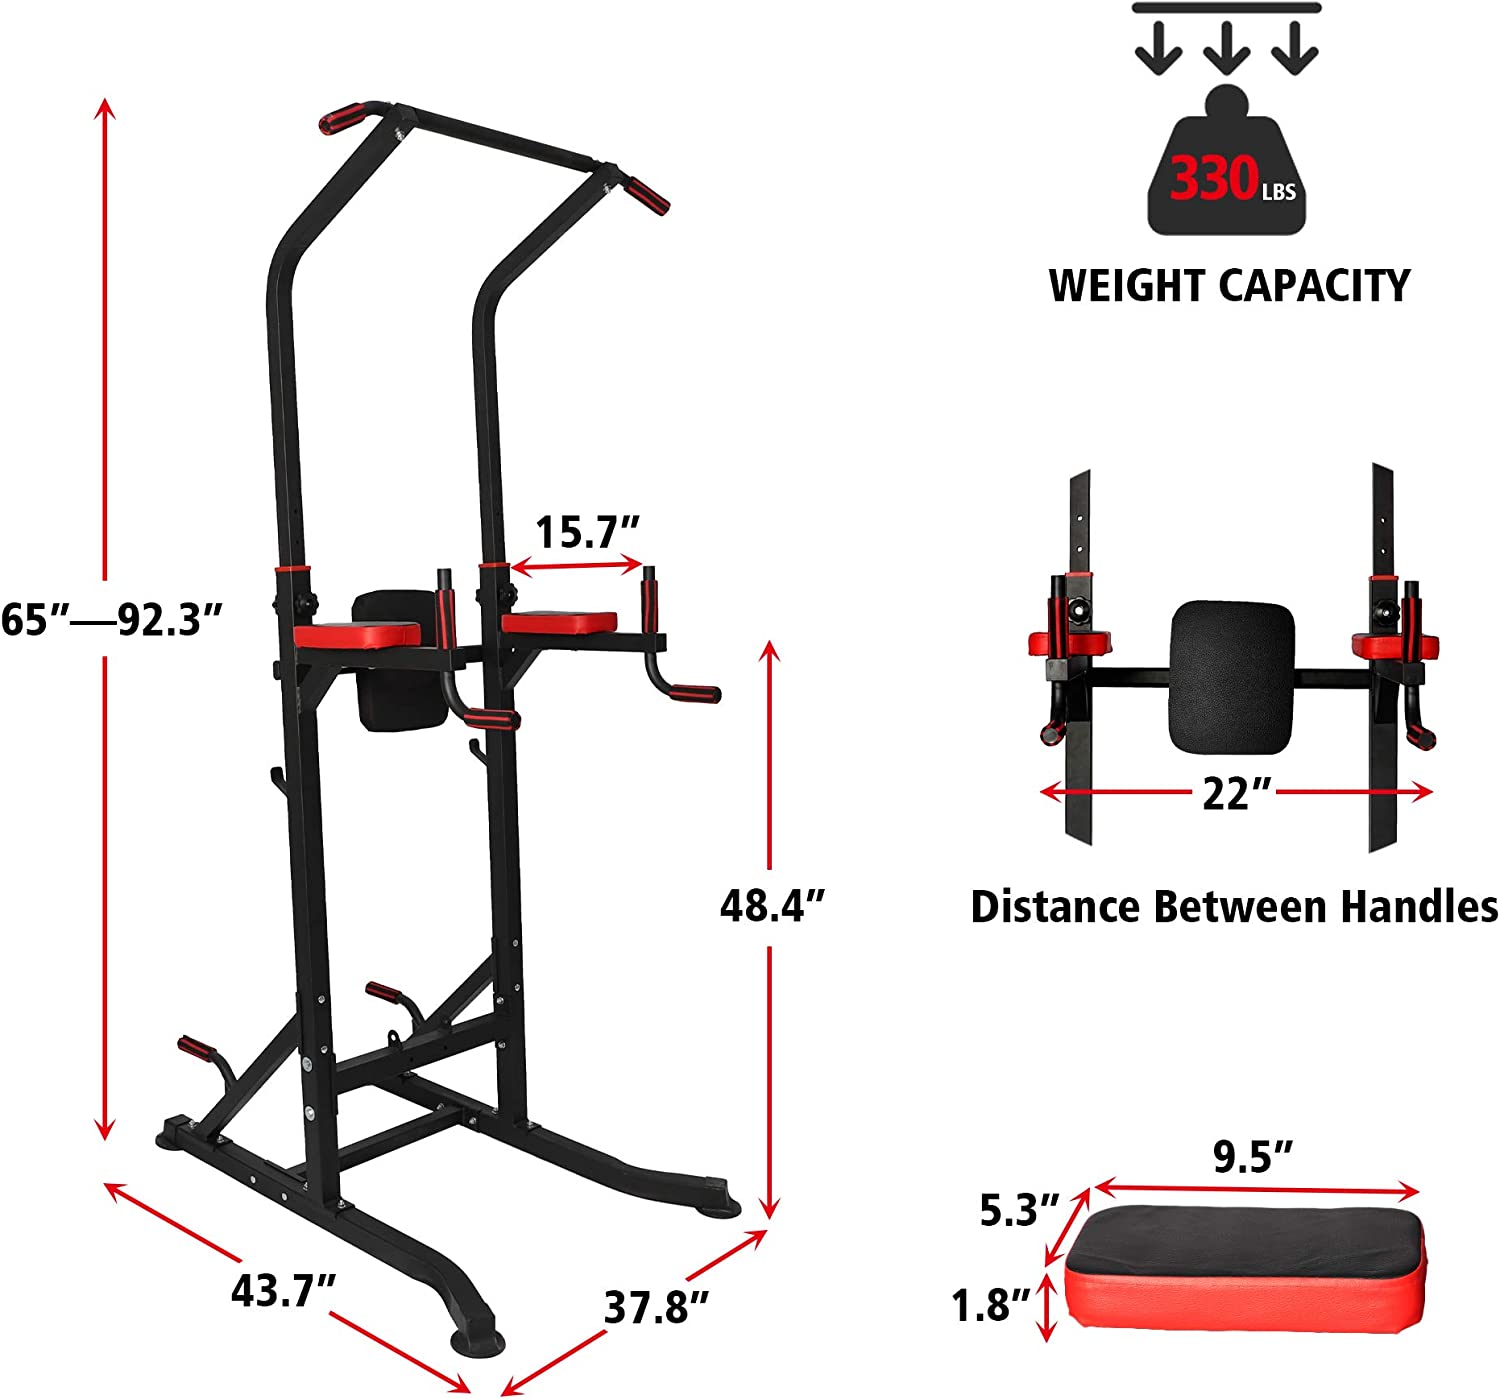 (Out of Stock) Power Tower Workout Dip Bar Station Adjustable Height Strength Training Pull Up Dip Gym Station